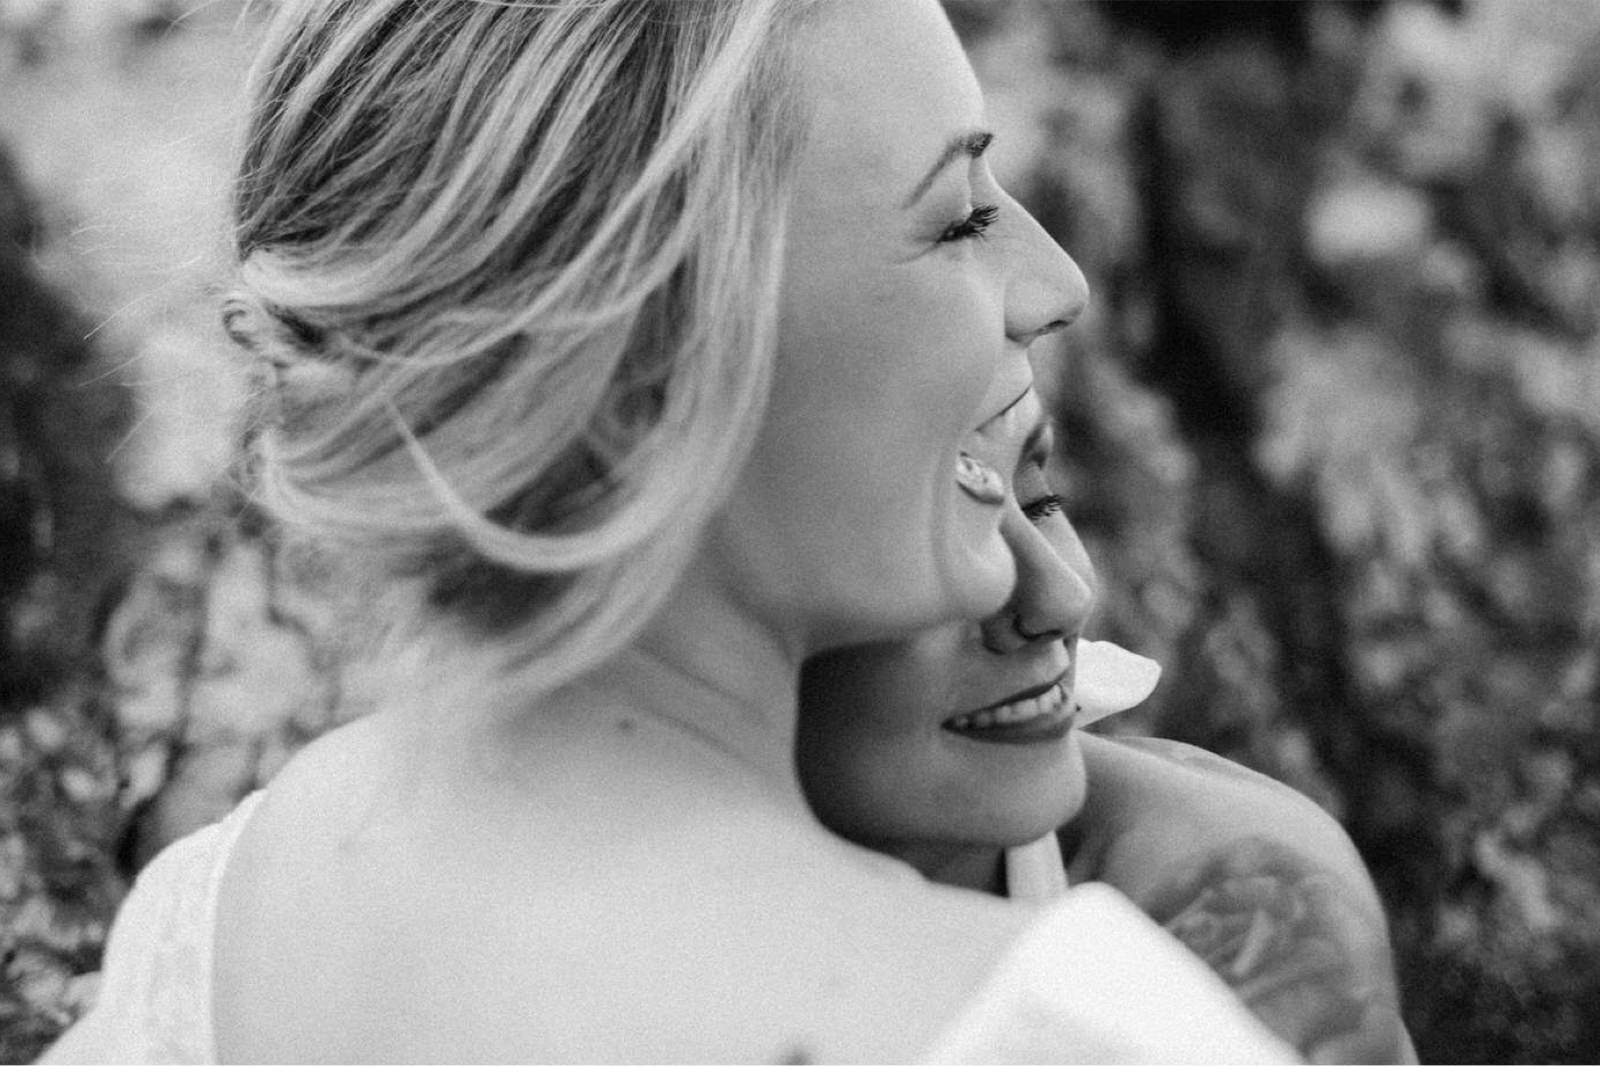 moment of laughter between two brides